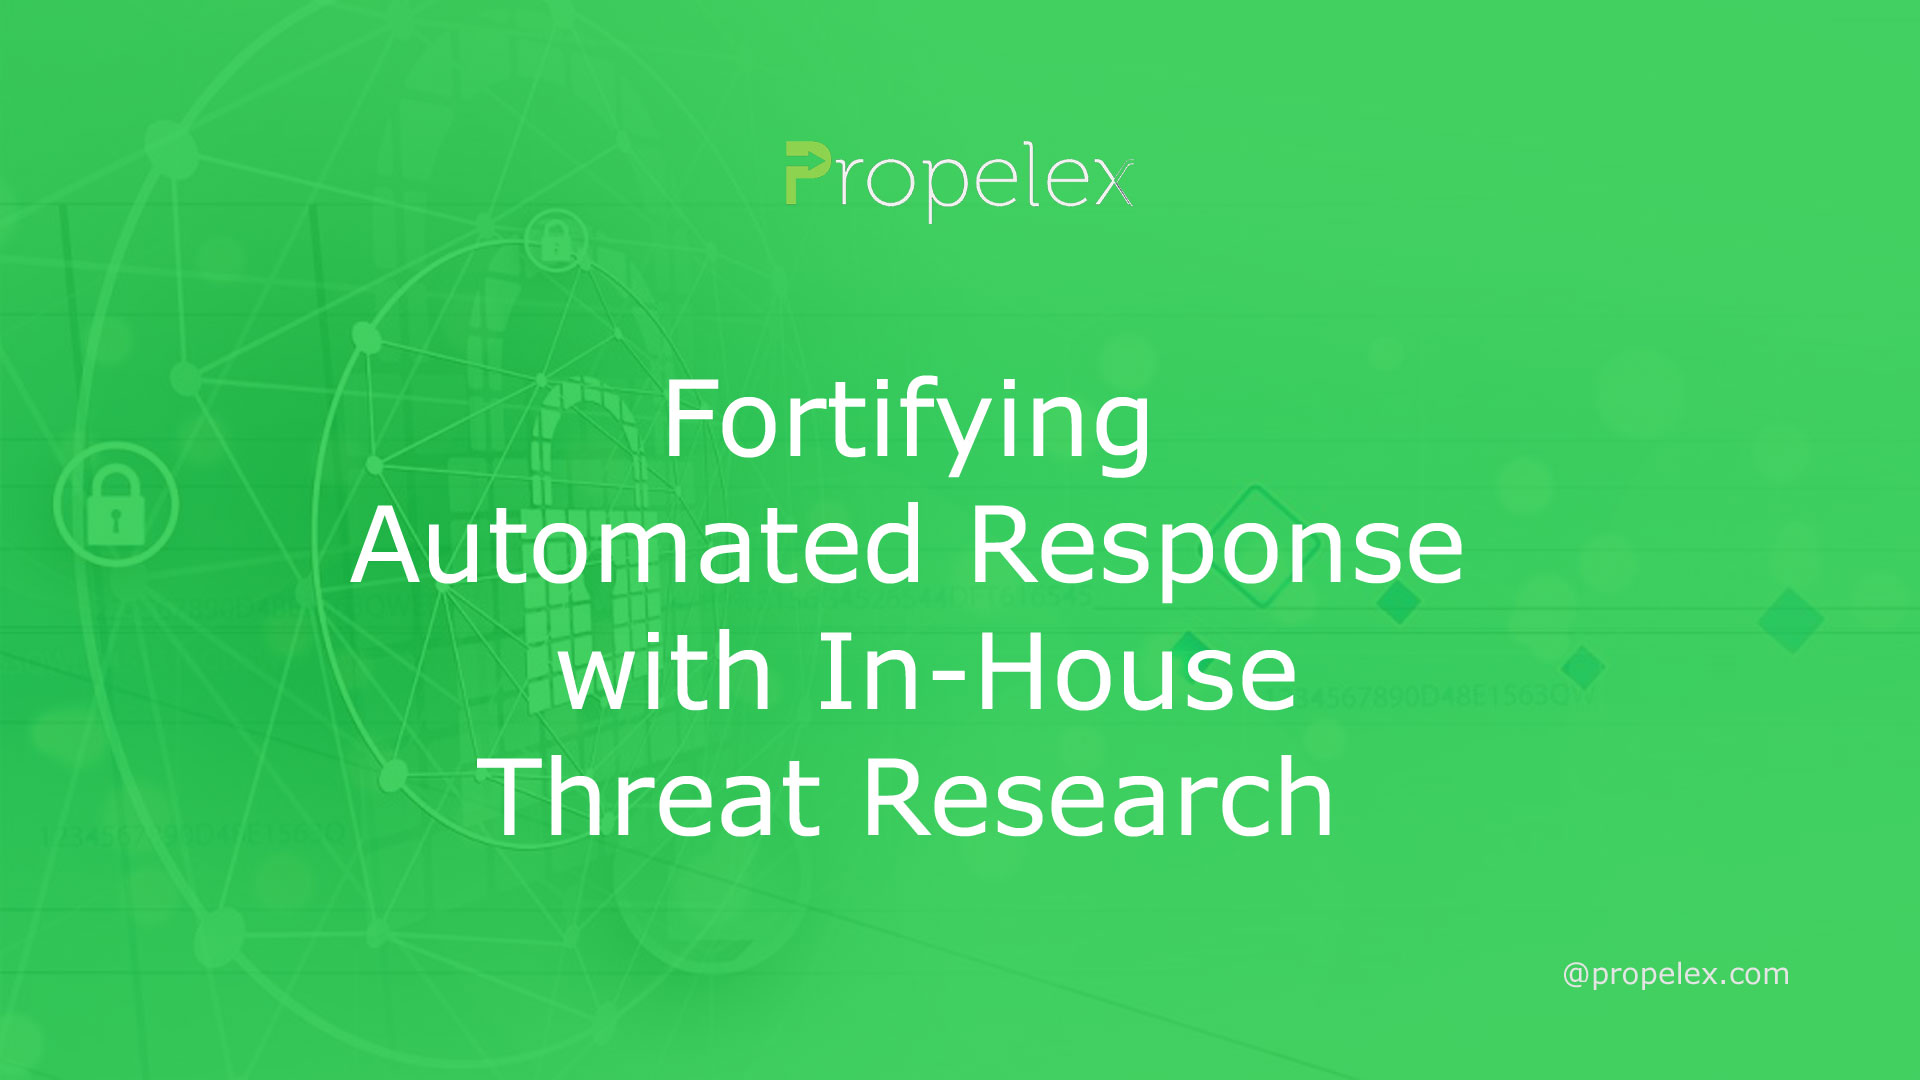 Fortifying Automated Response with In-House Threat Research